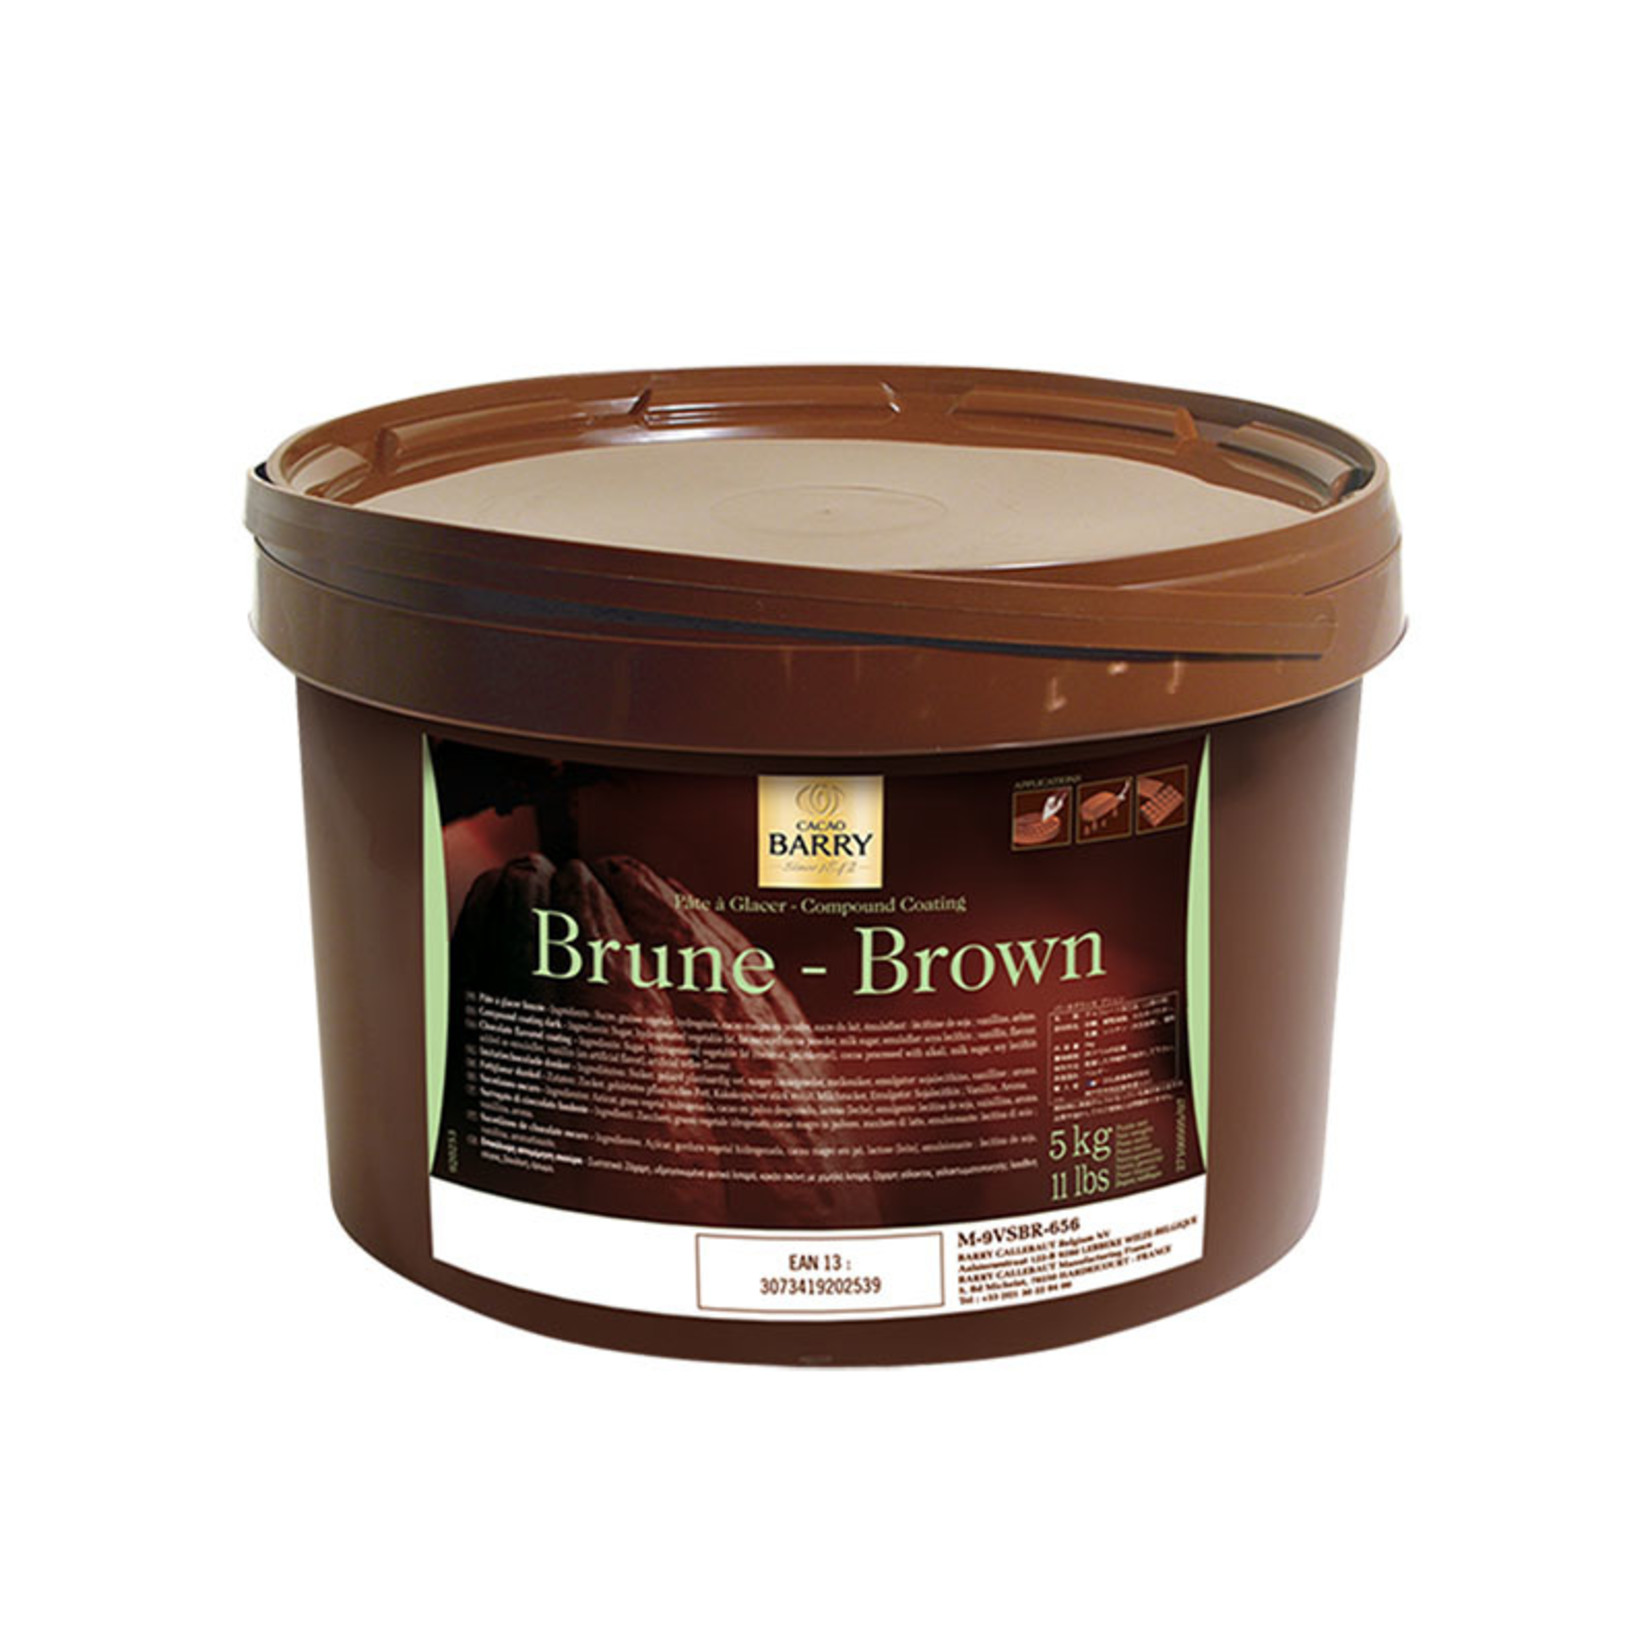 Cacao Barry Cacao Barry - Pate Glacer Brune, Dark Coating Chocolate - 11 lb